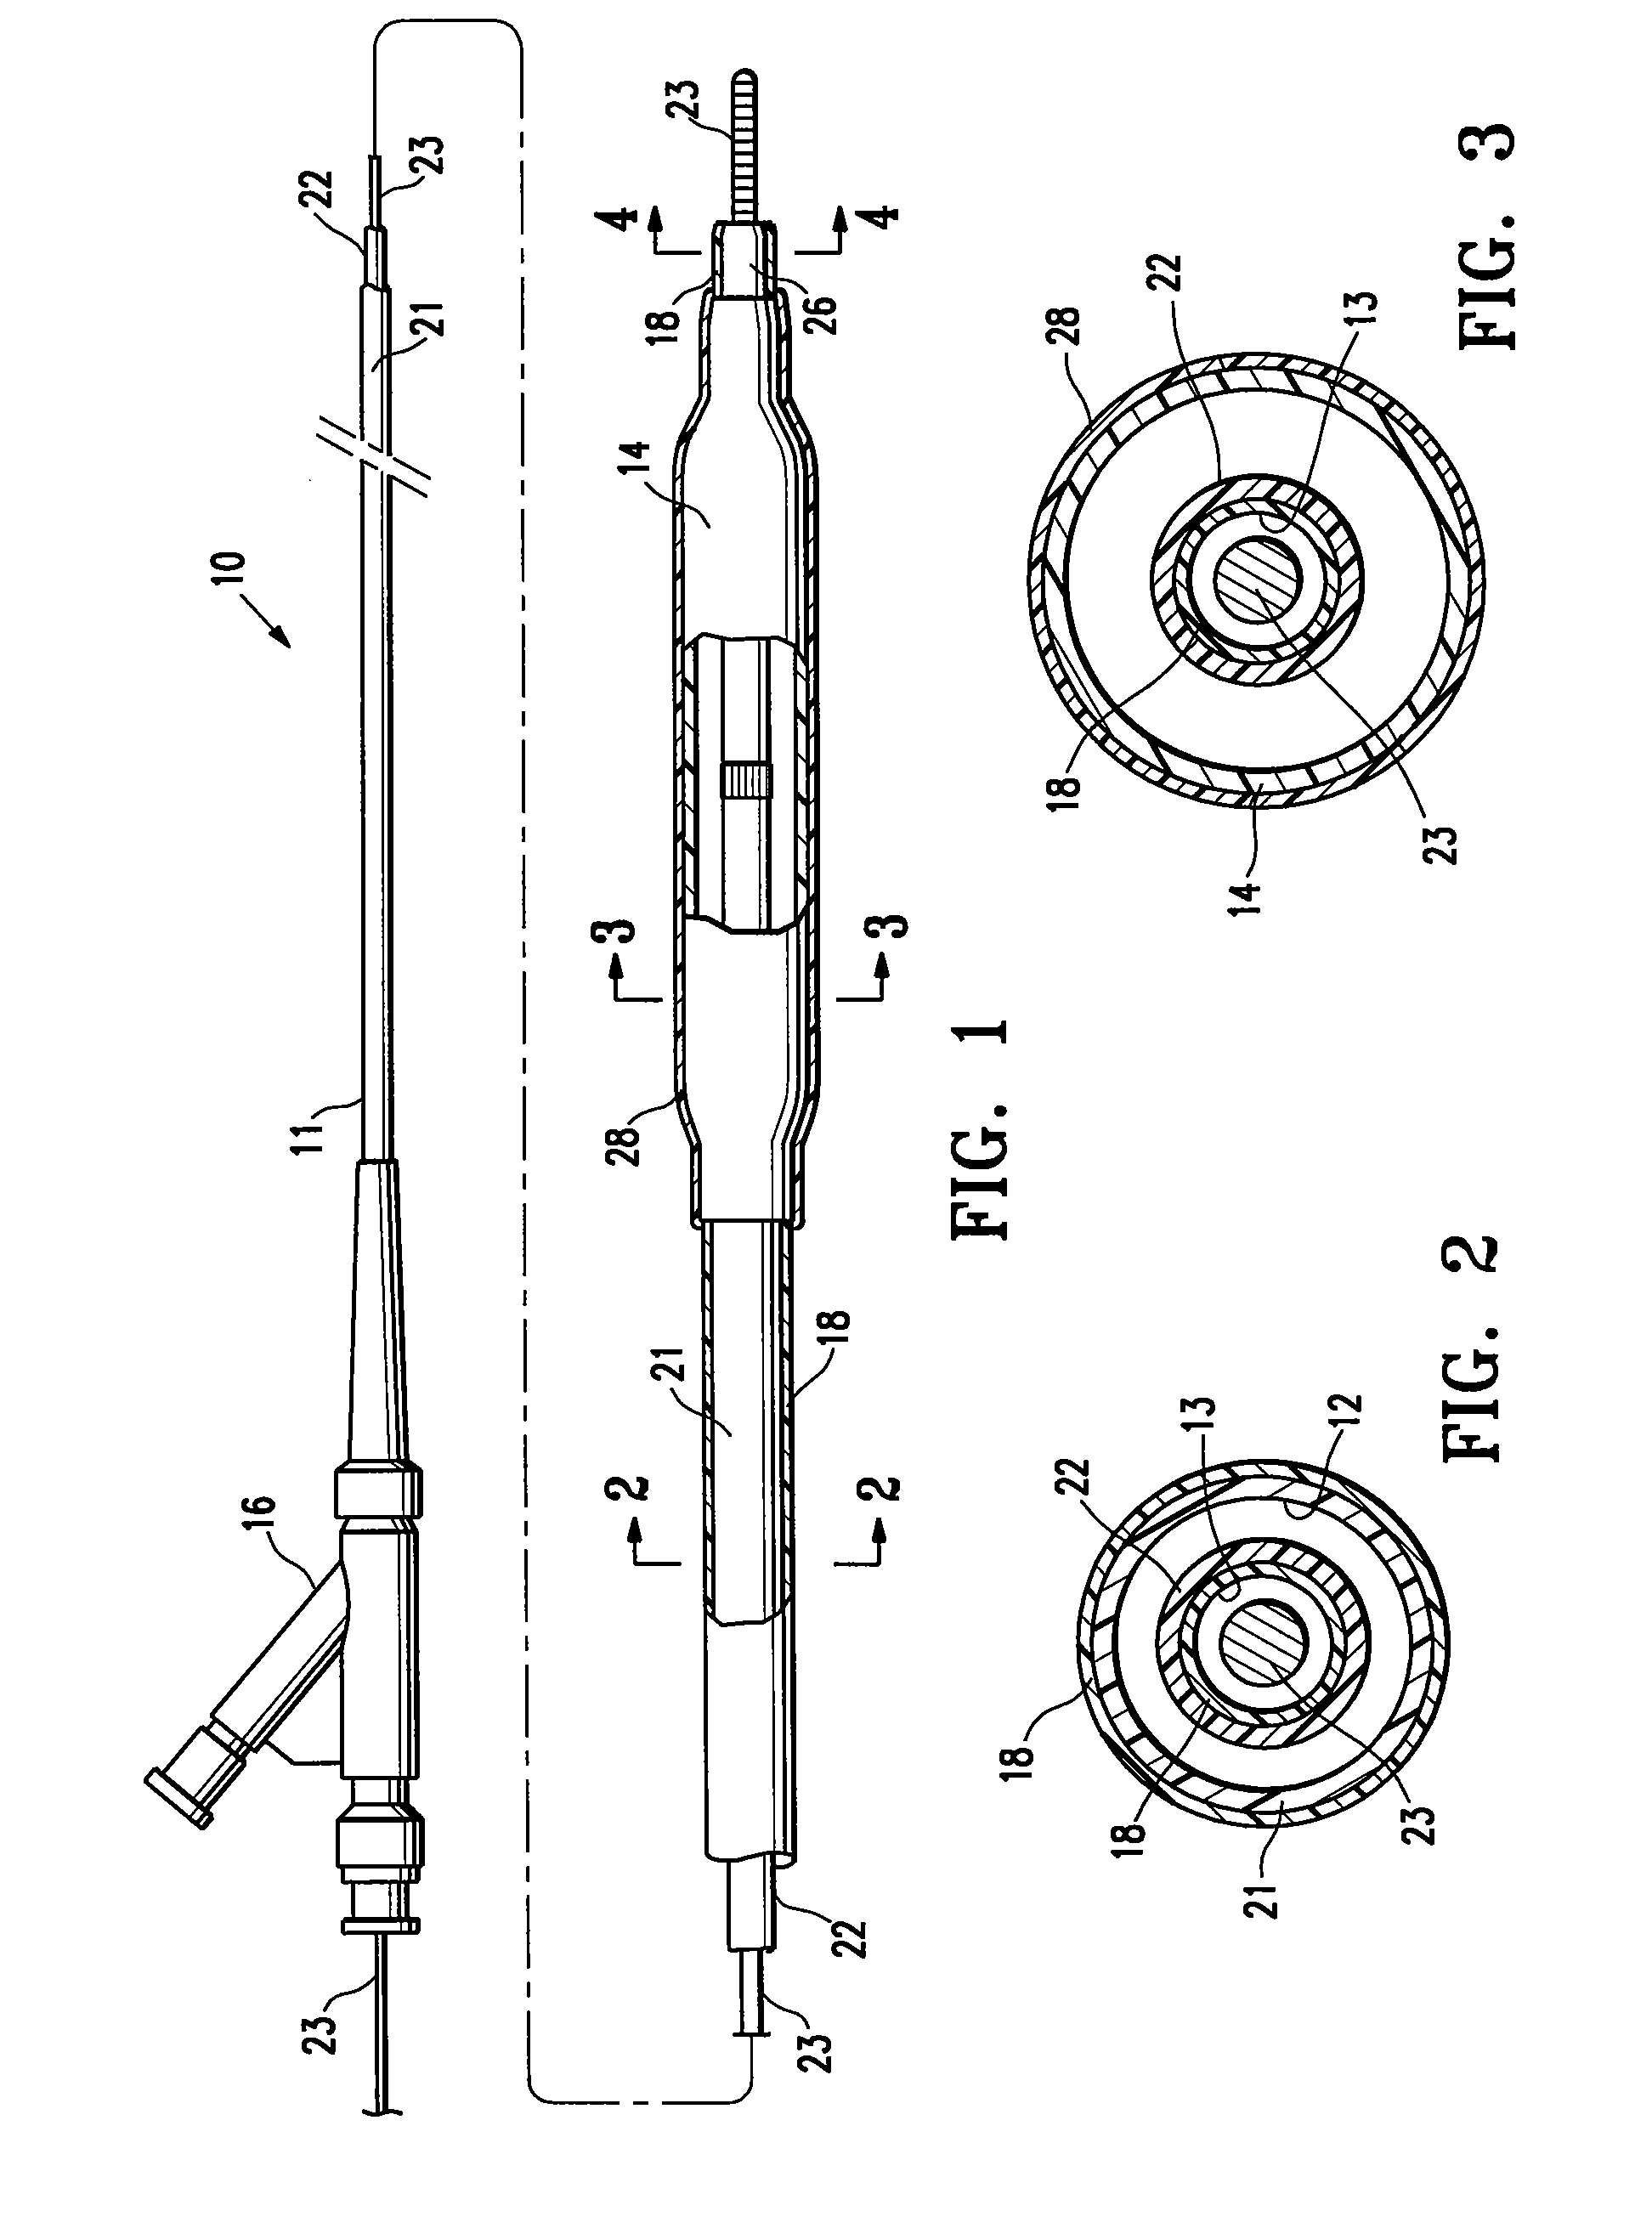 Medical device having a lubricious coating with a hydrophilic compound in an interlocking network